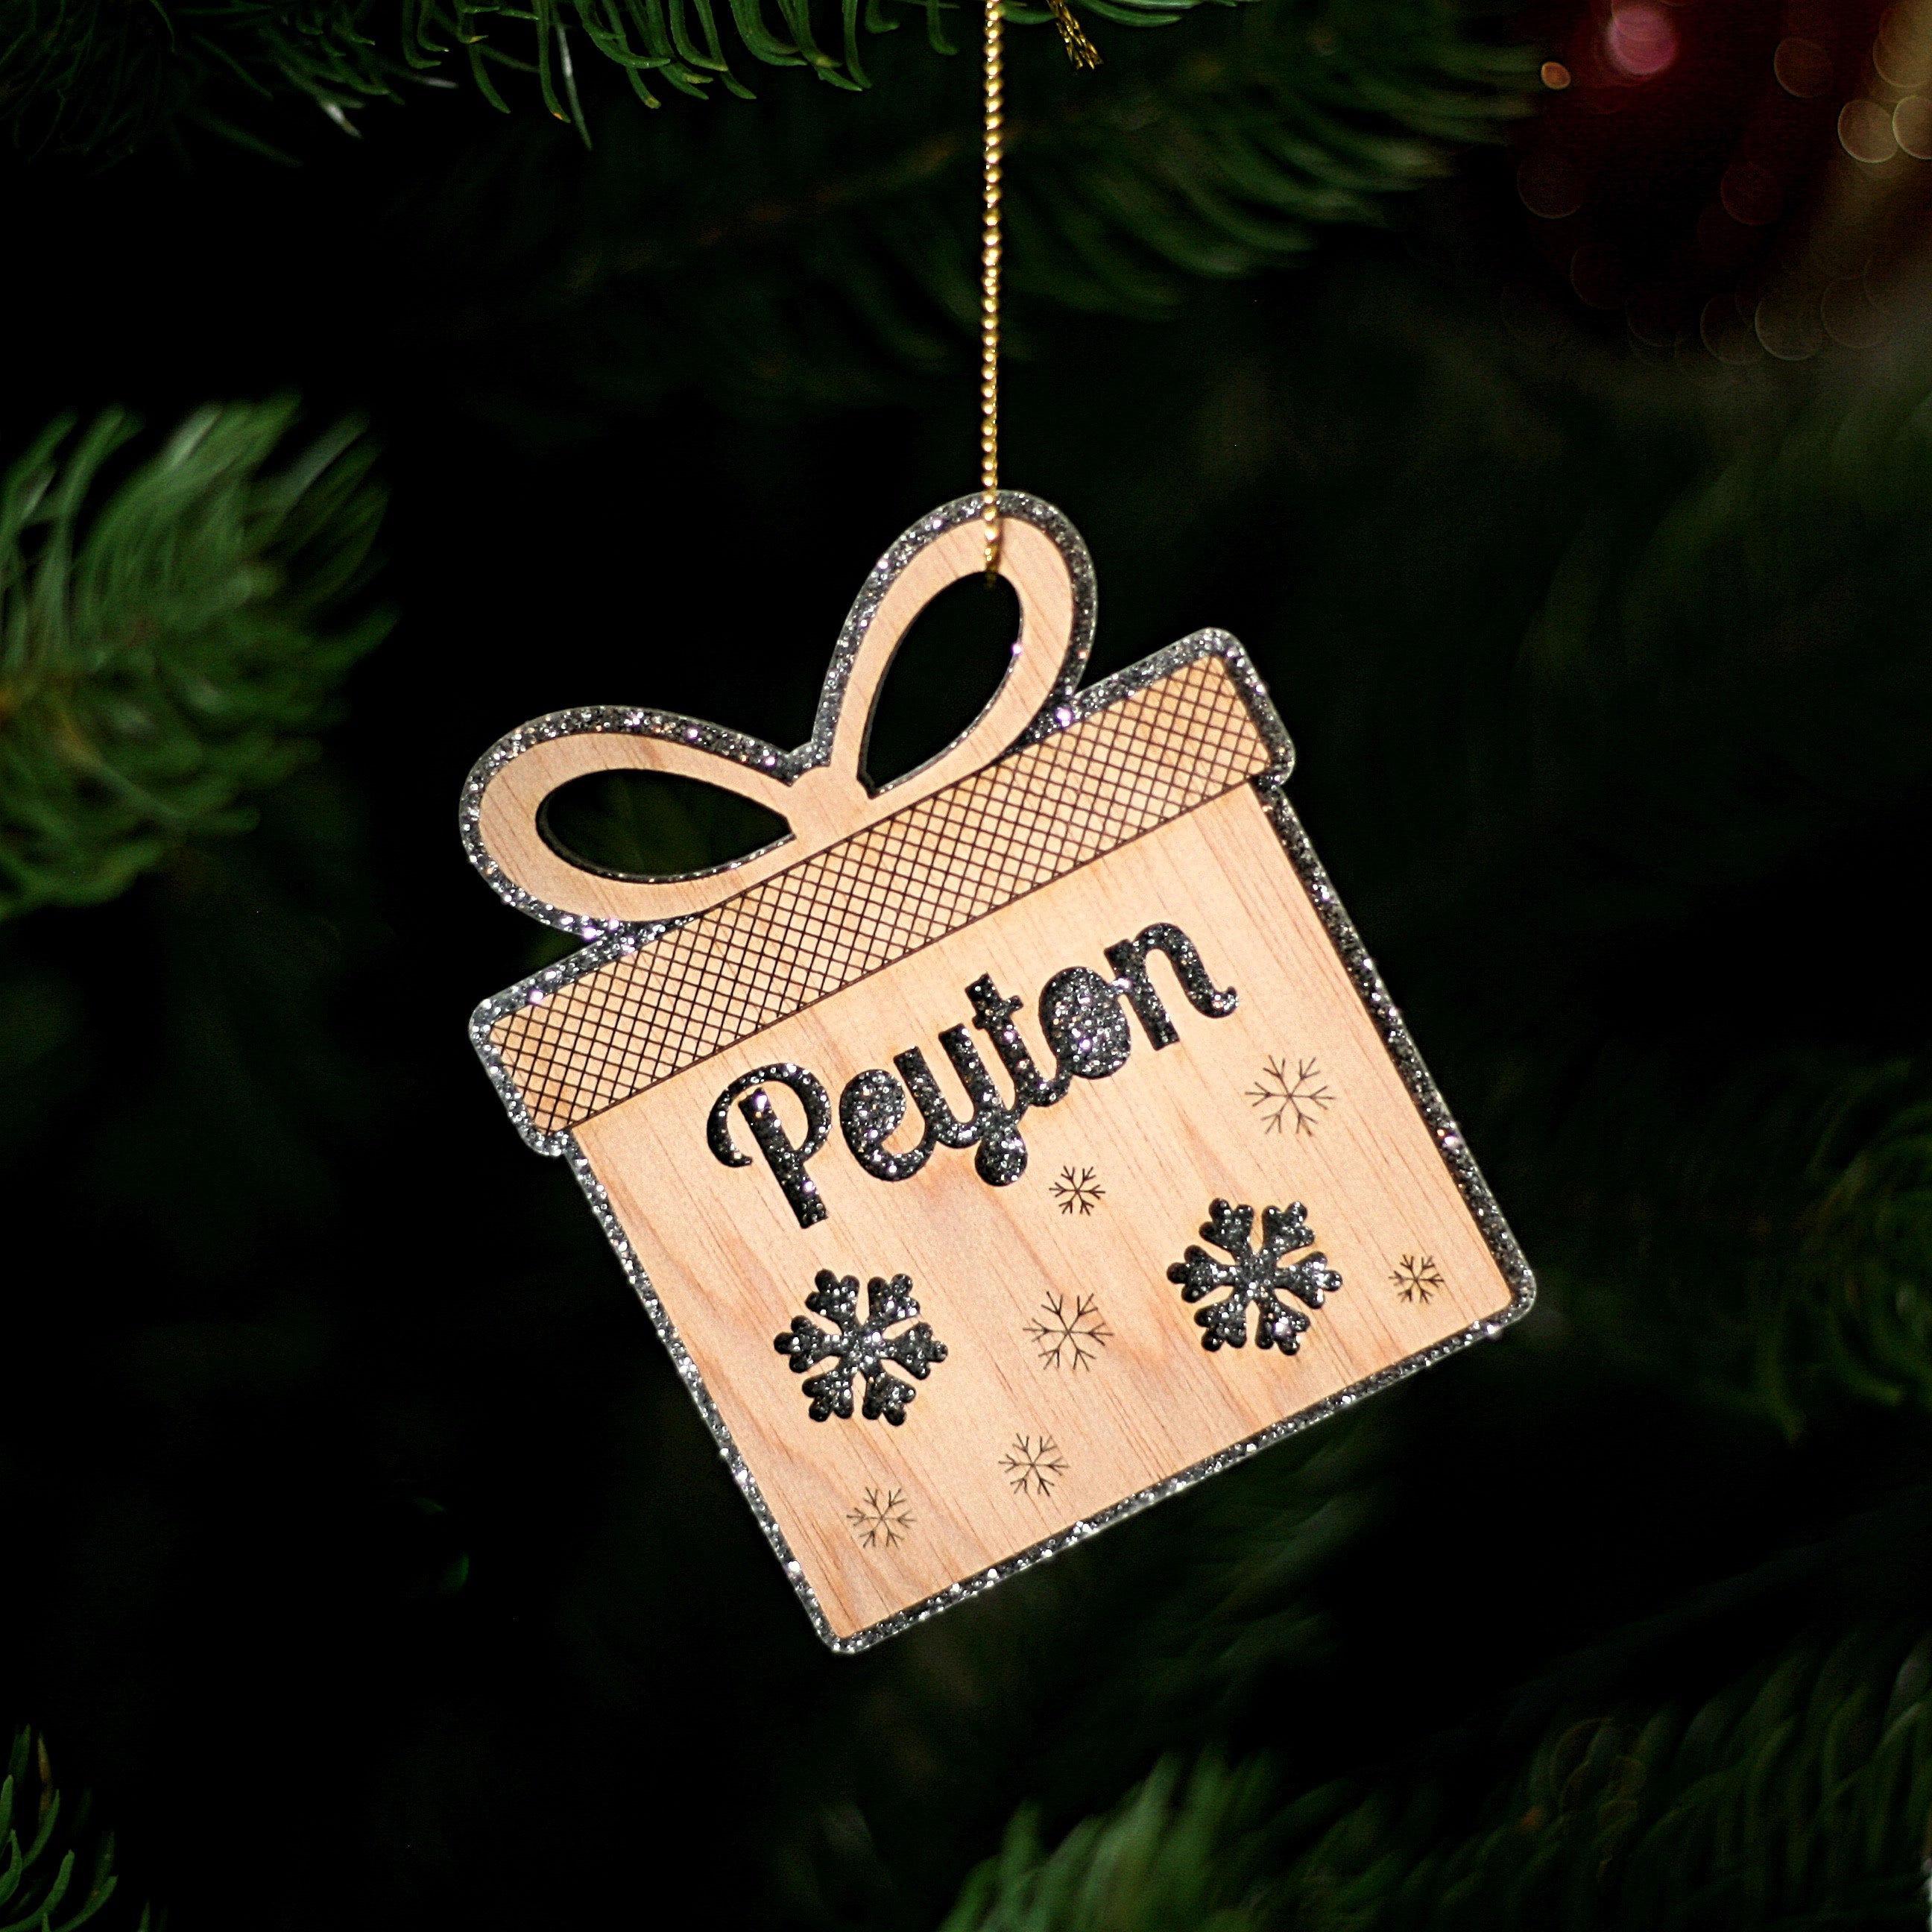 Set of 6 Personalised Glitter and Wood Christmas Ornaments